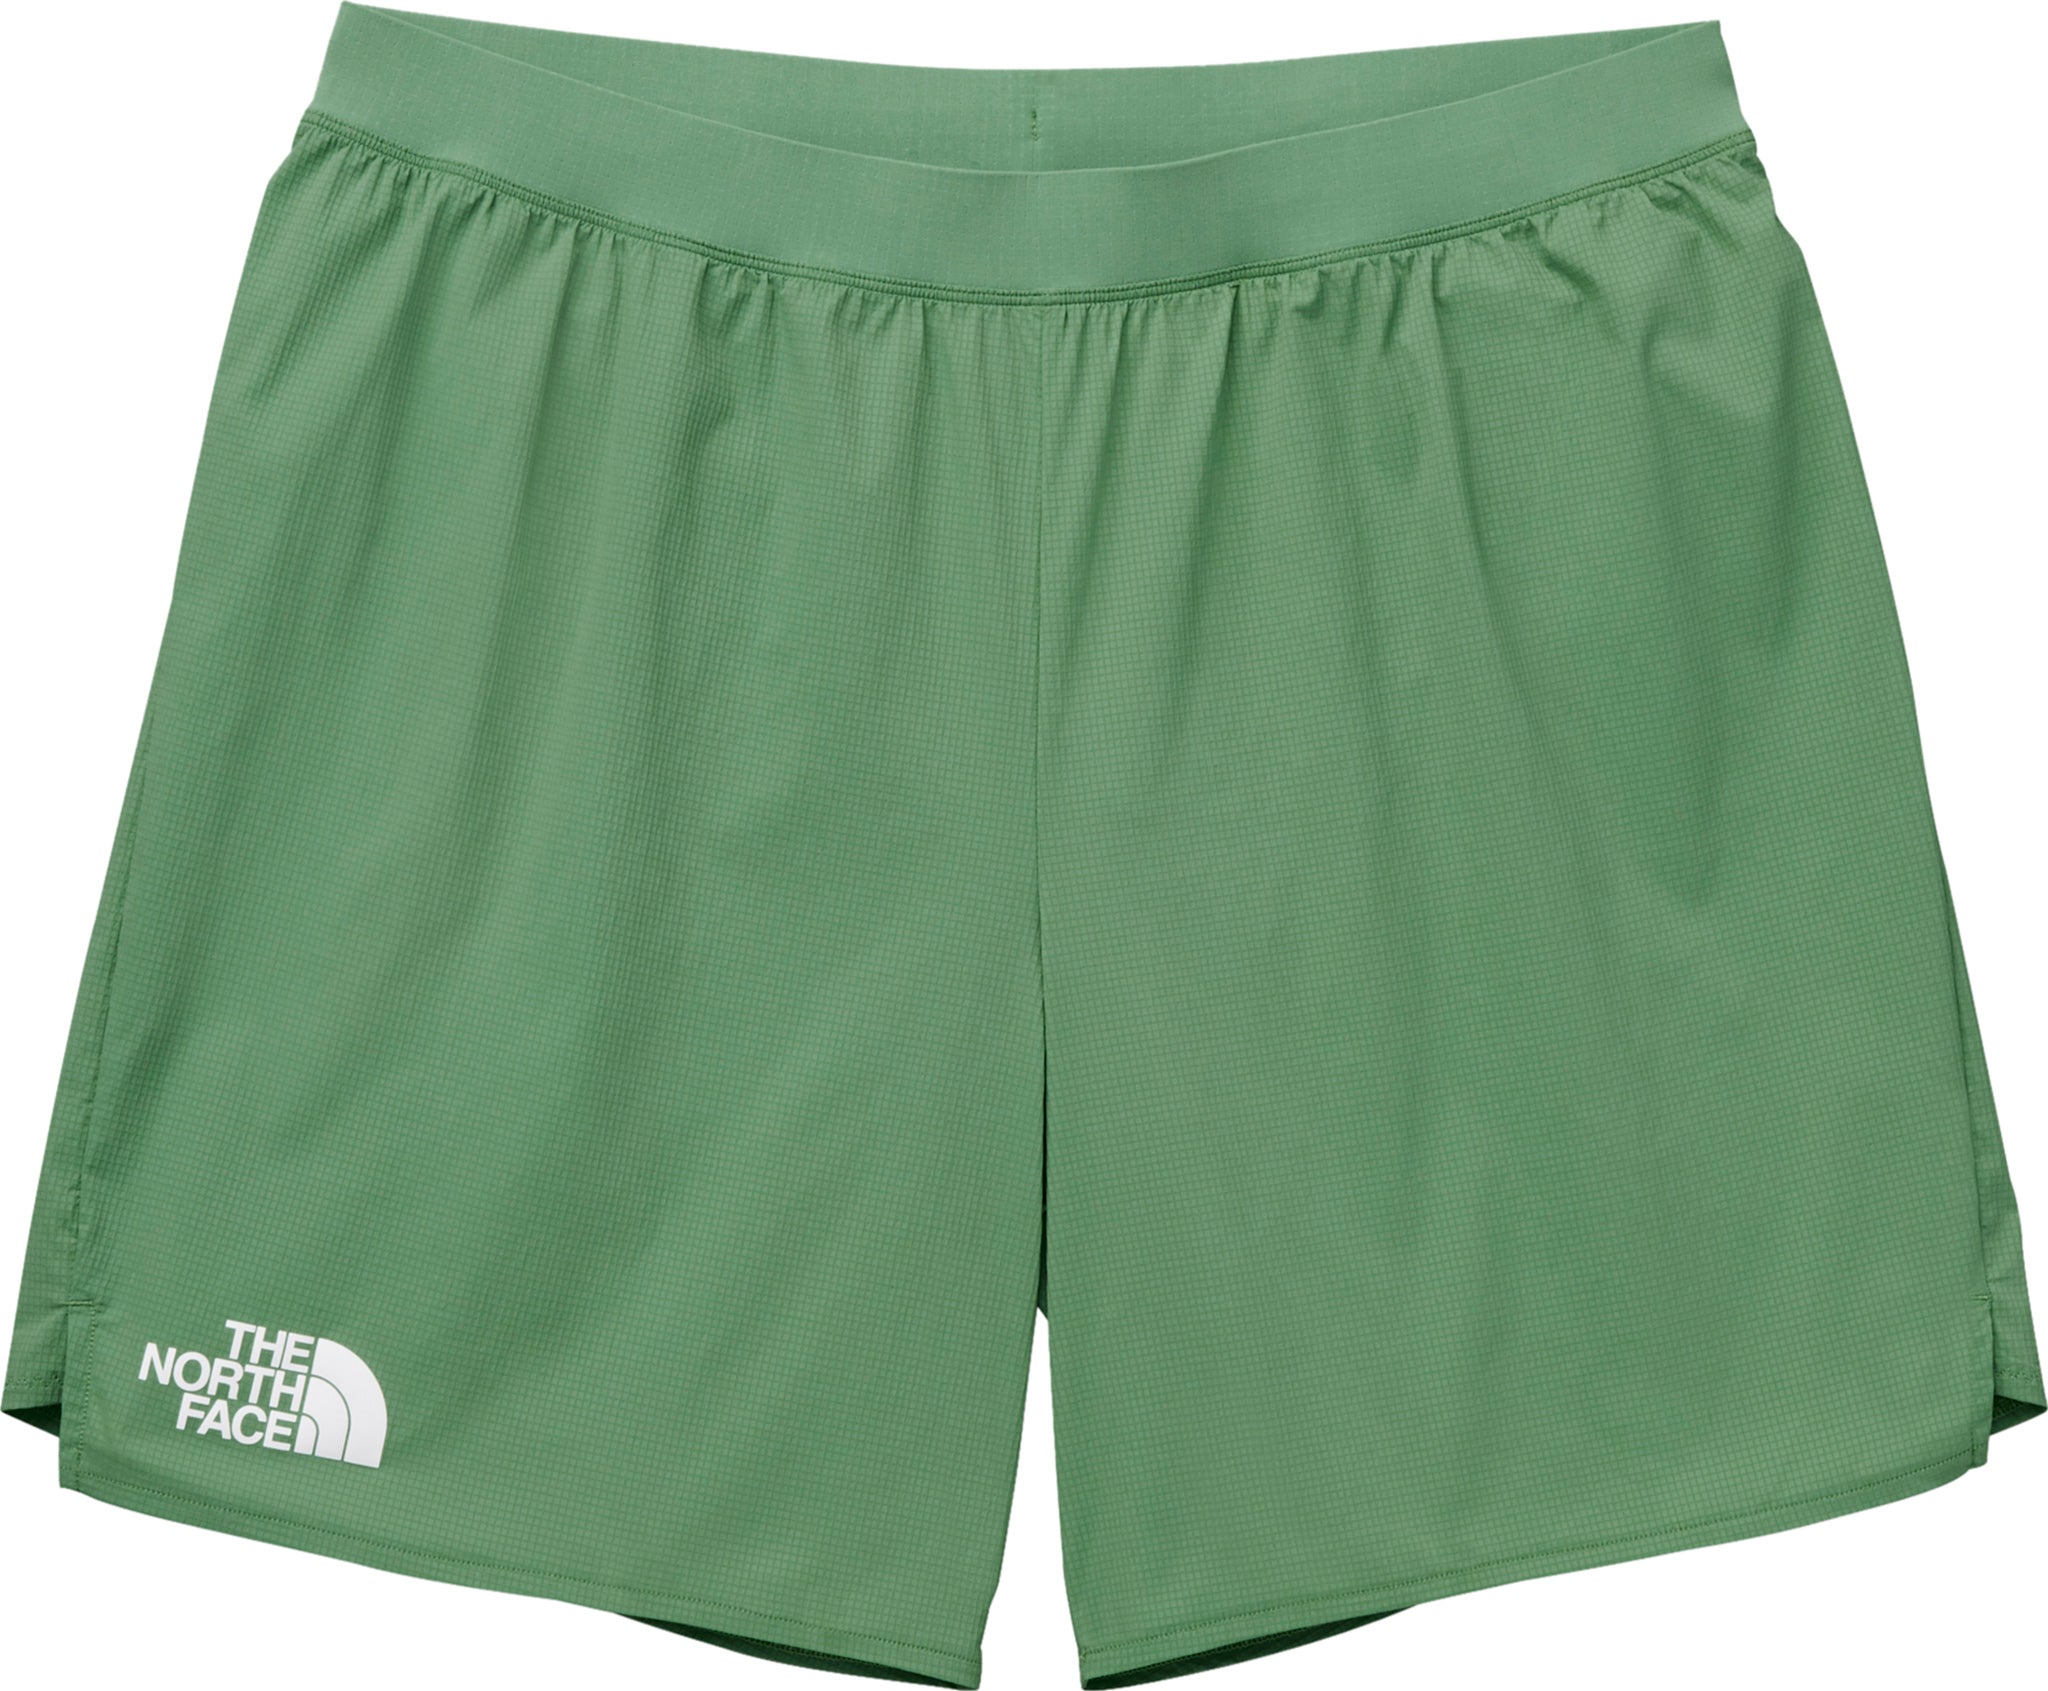 The North Face Summit Pacesetter Run Brief Shorts - Men's